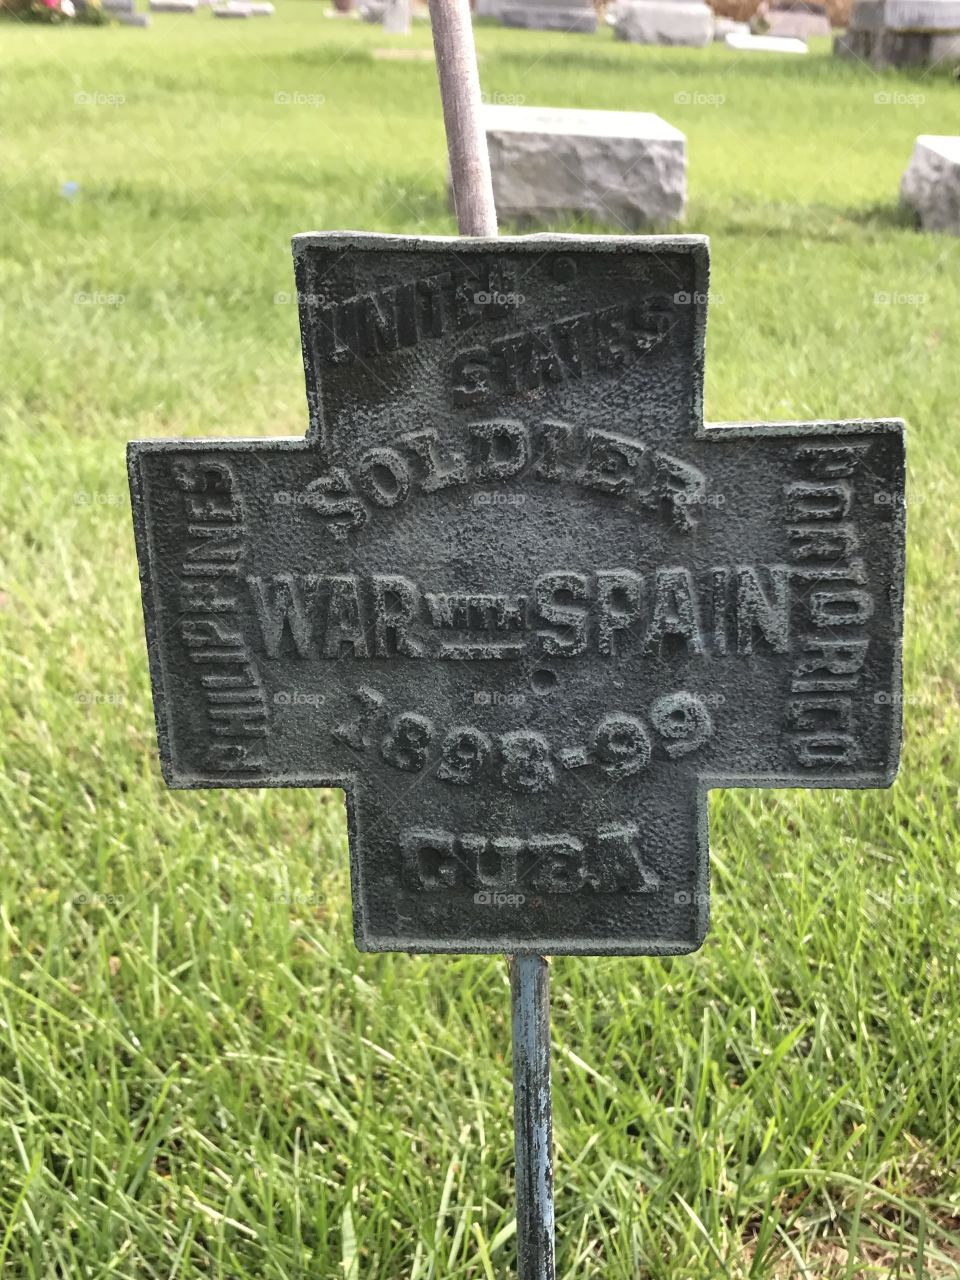 I discovered this while visiting the cemetery.